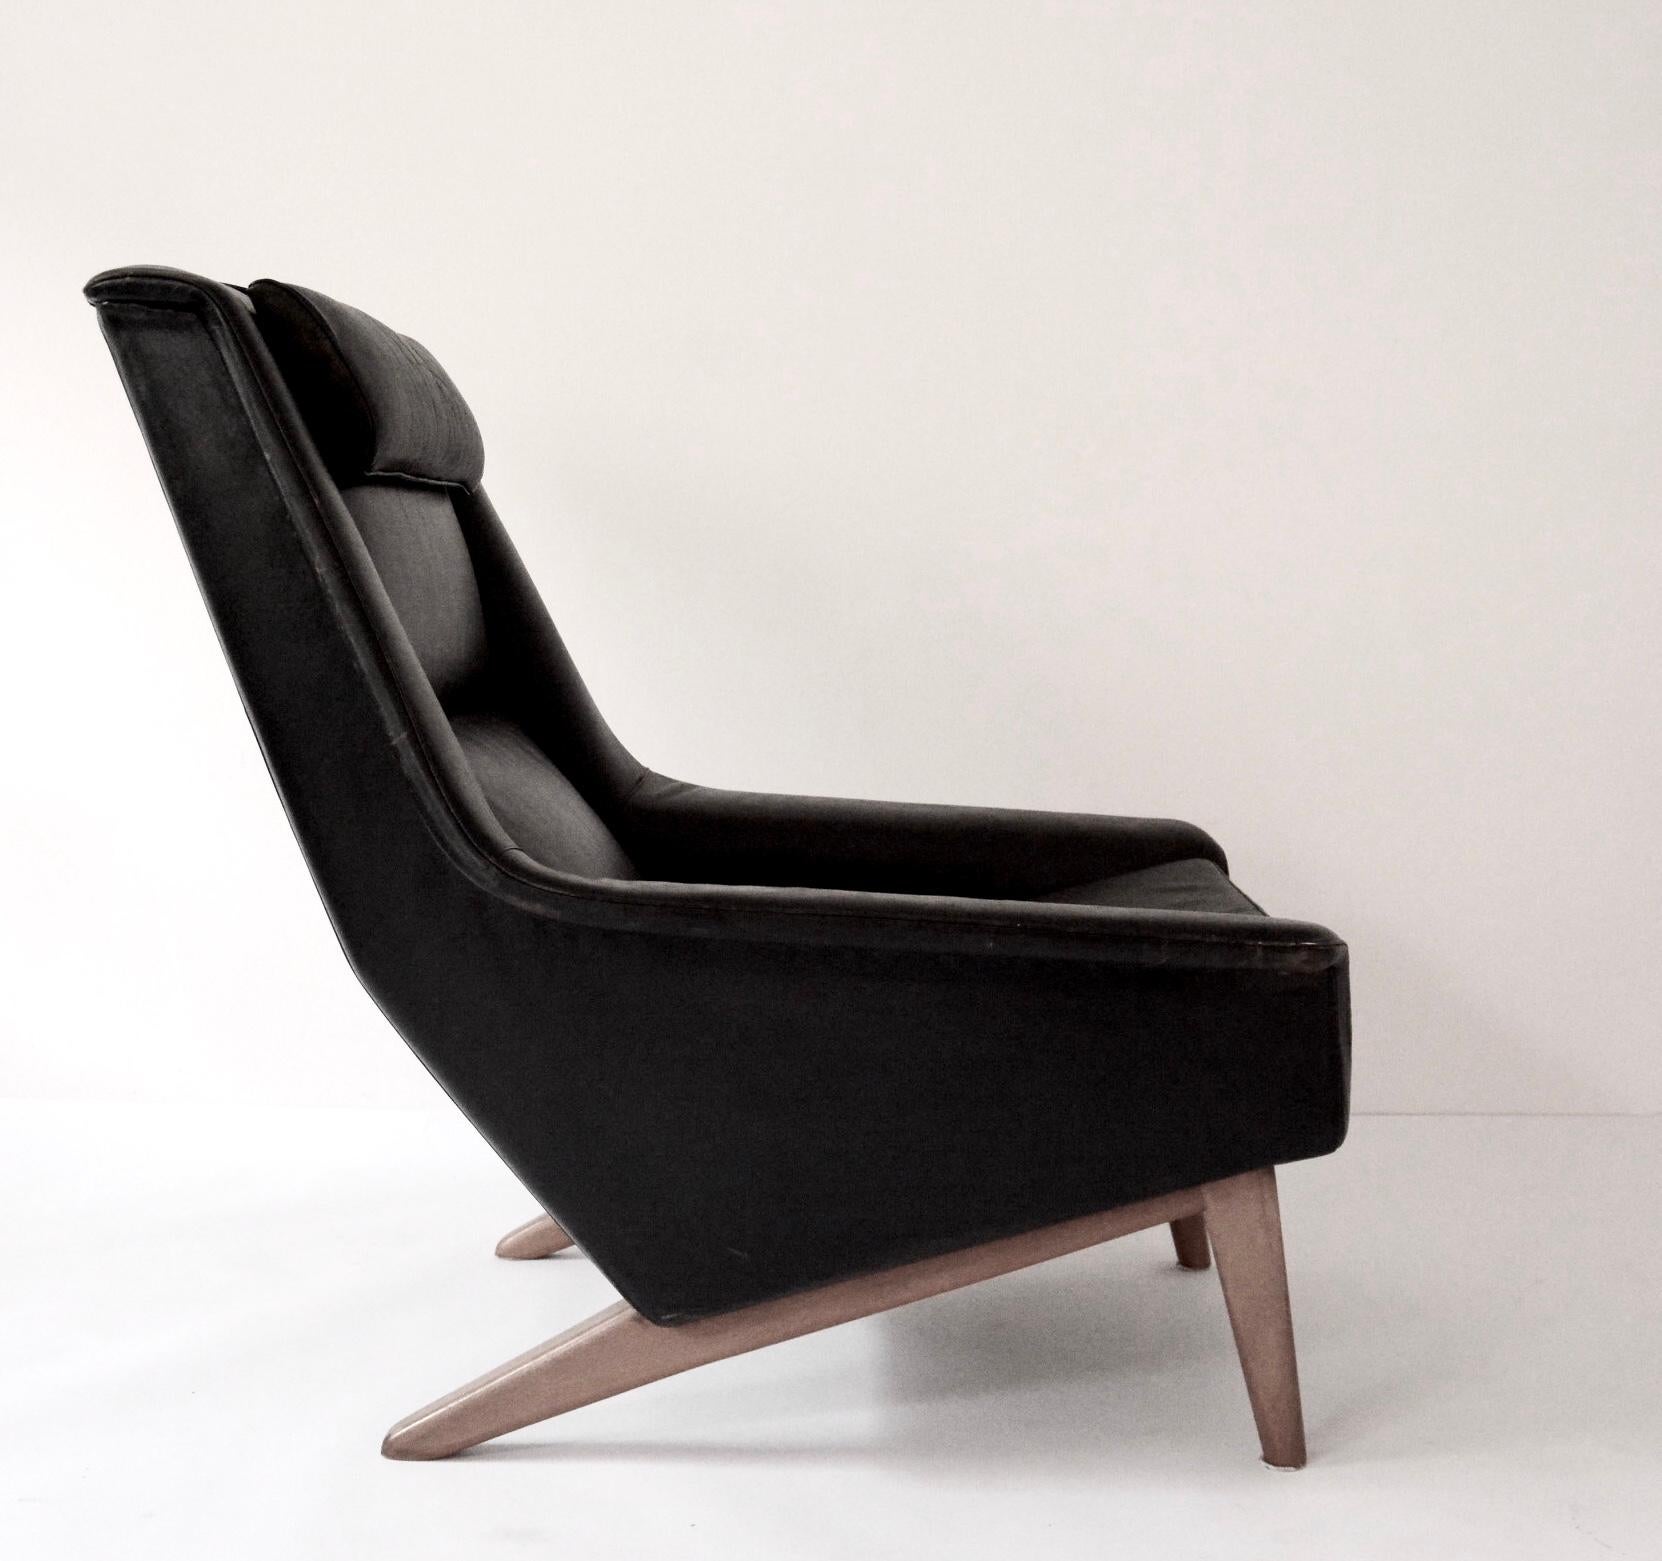 Mid-Century Modern Black Leather Folke Ohlsson Armchair M 4410 Manufactured by Fritz Hansen, 1958 For Sale